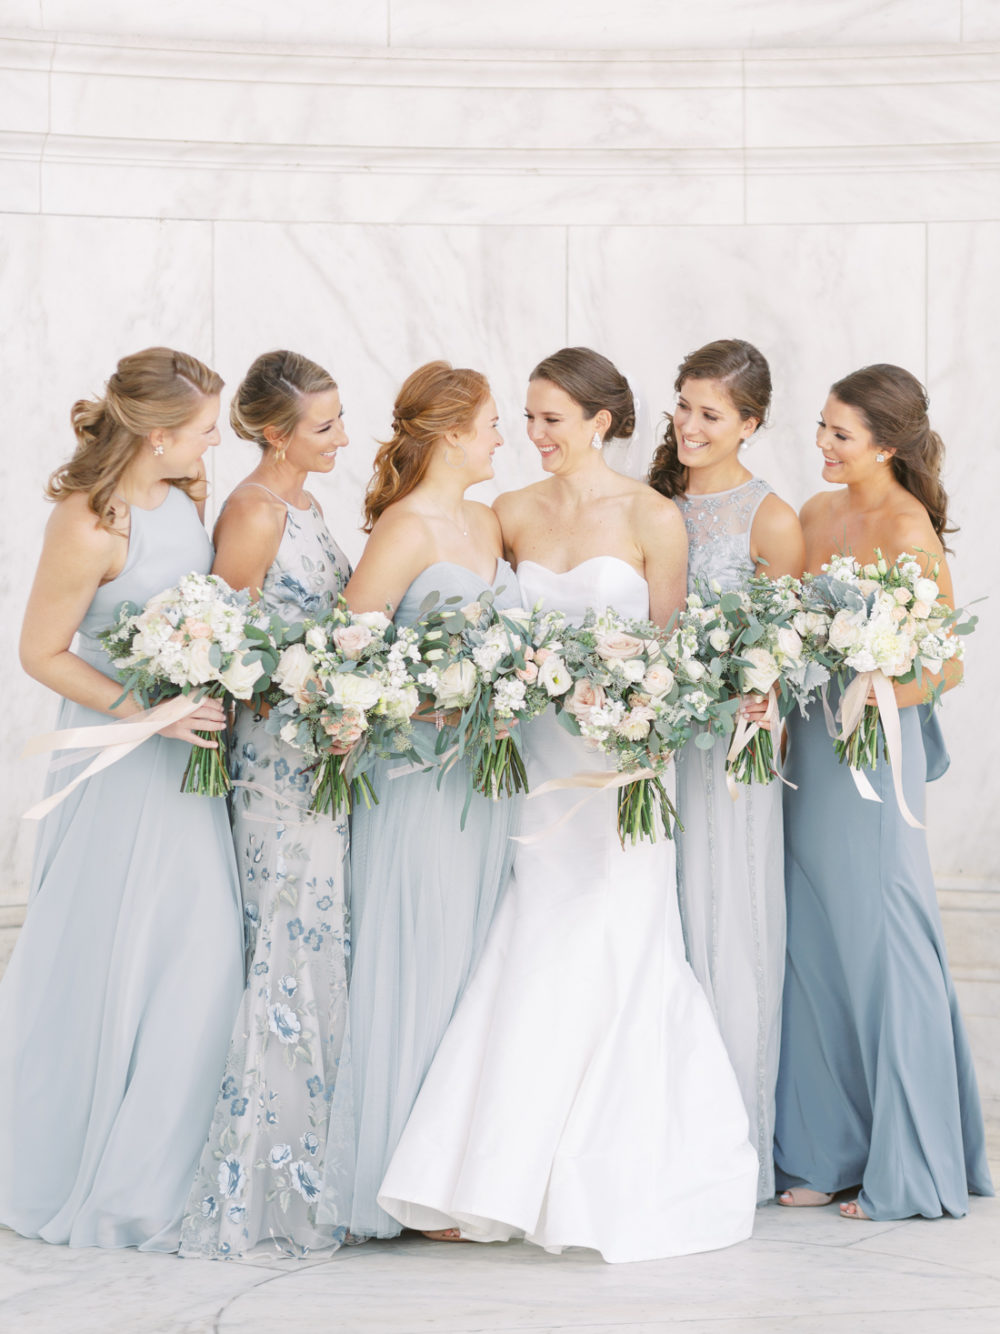 Dusty blue bridesmaids at the Jefferson Memorial for wedding pictures.